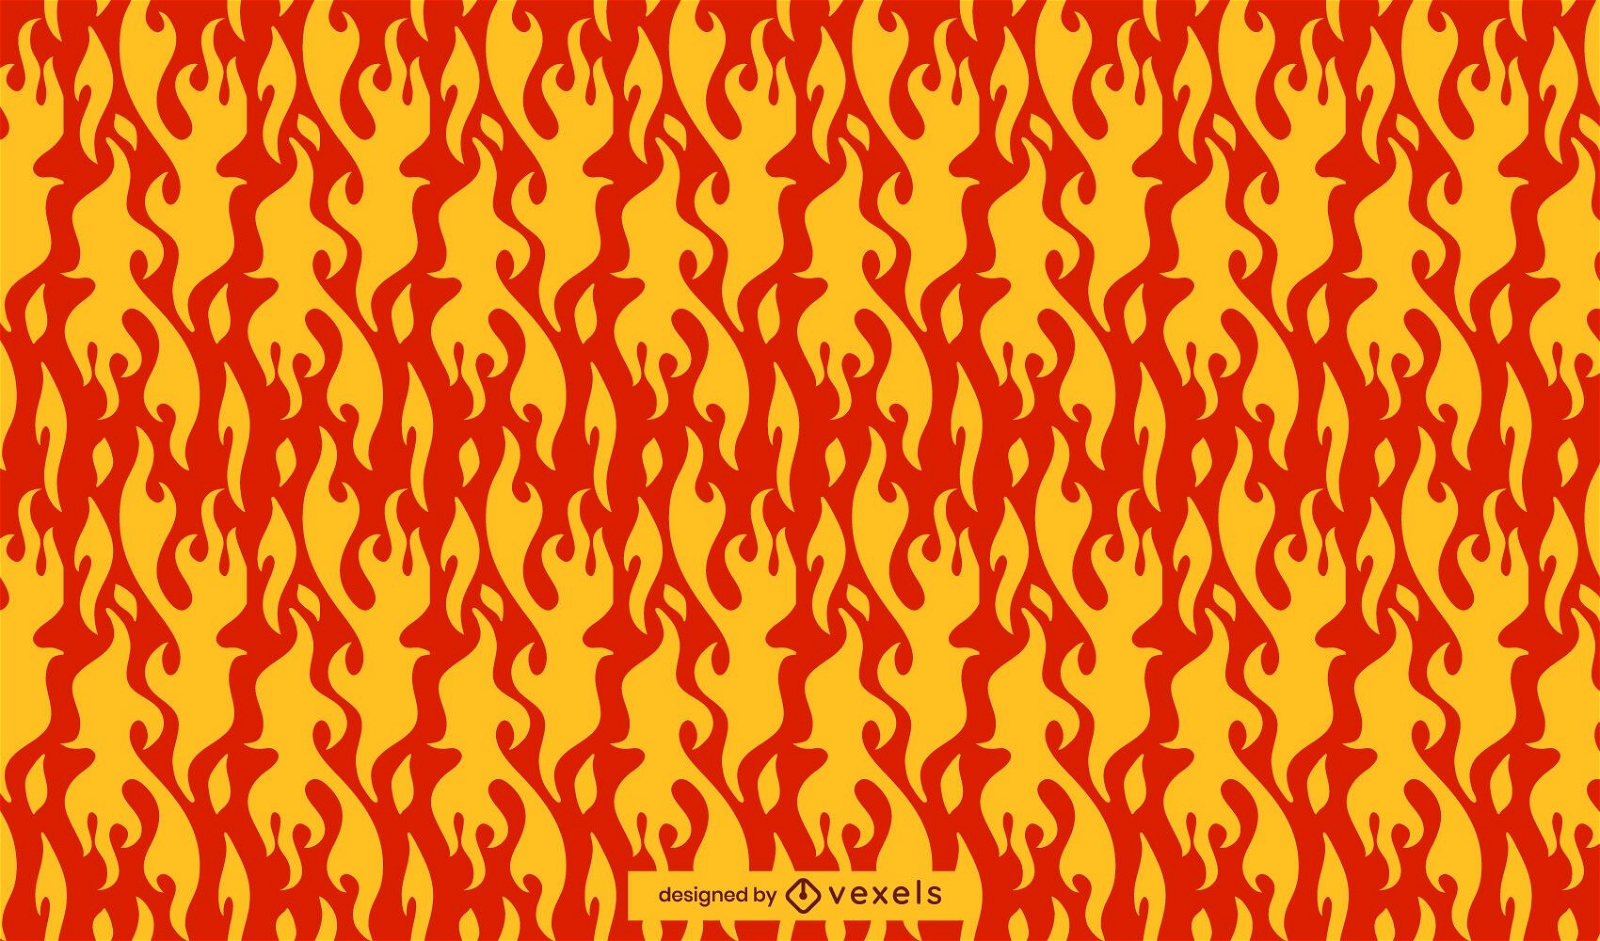 Red flames pattern design